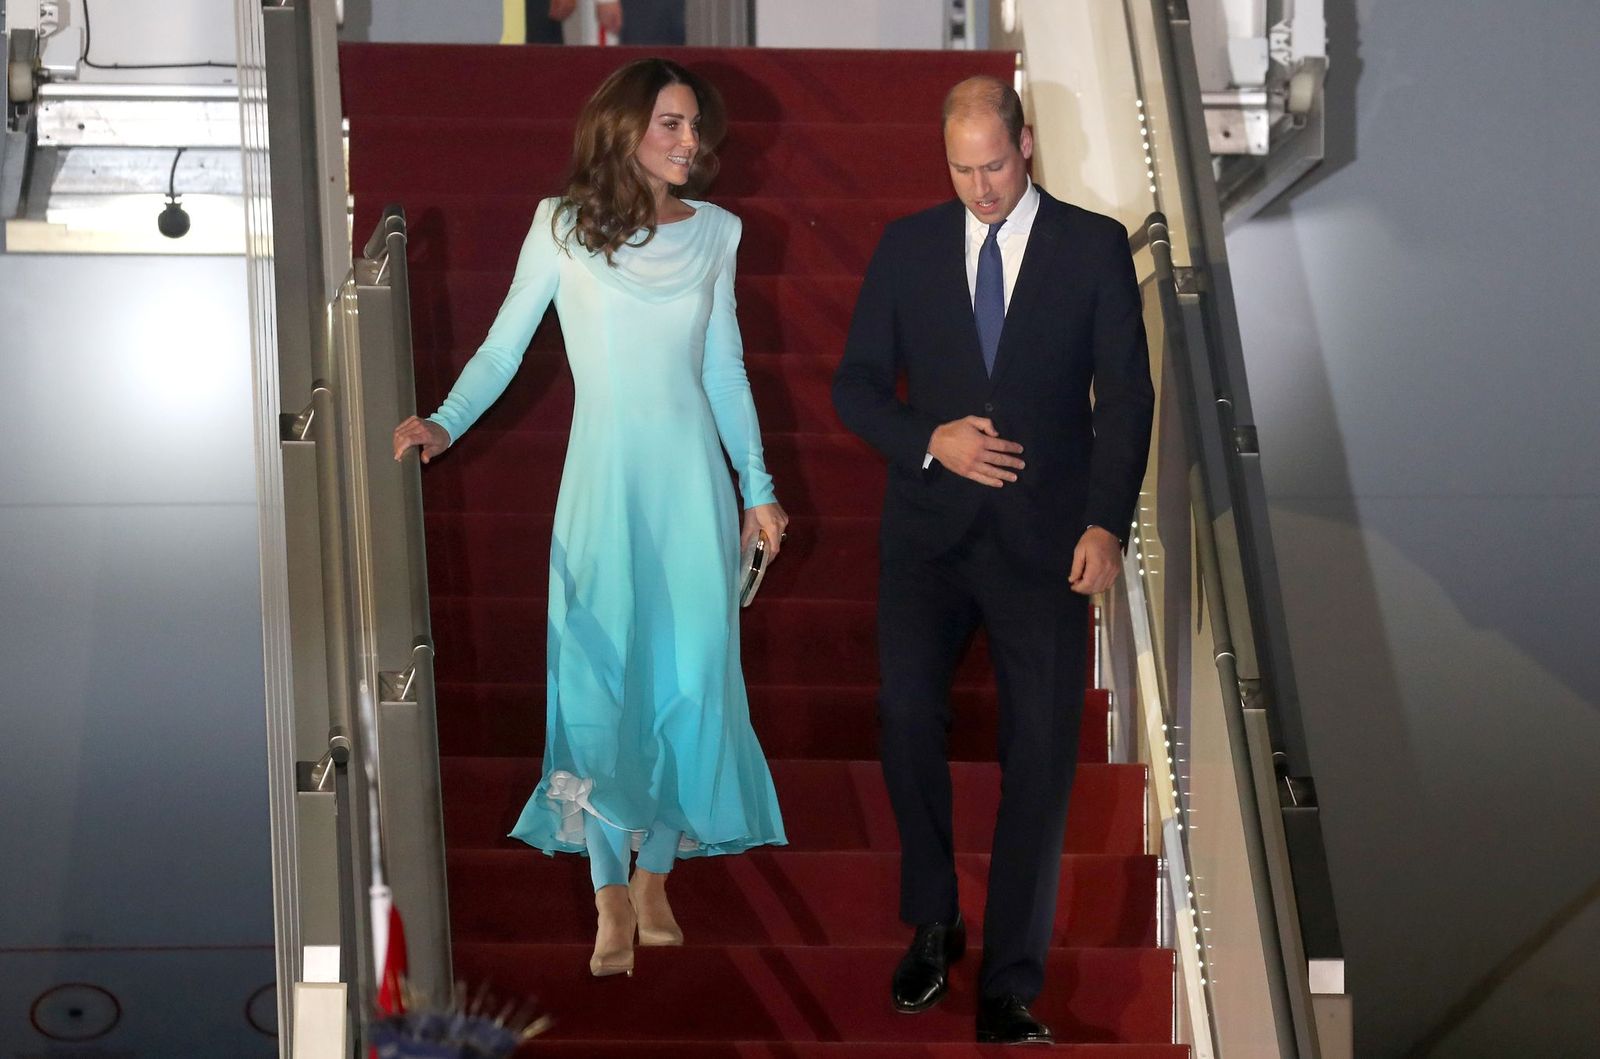 Kate Middleton and Prince William at Kur Khan airbase ahead of their royal tour of Pakistan on October 14, 2019 | Source: Getty Images